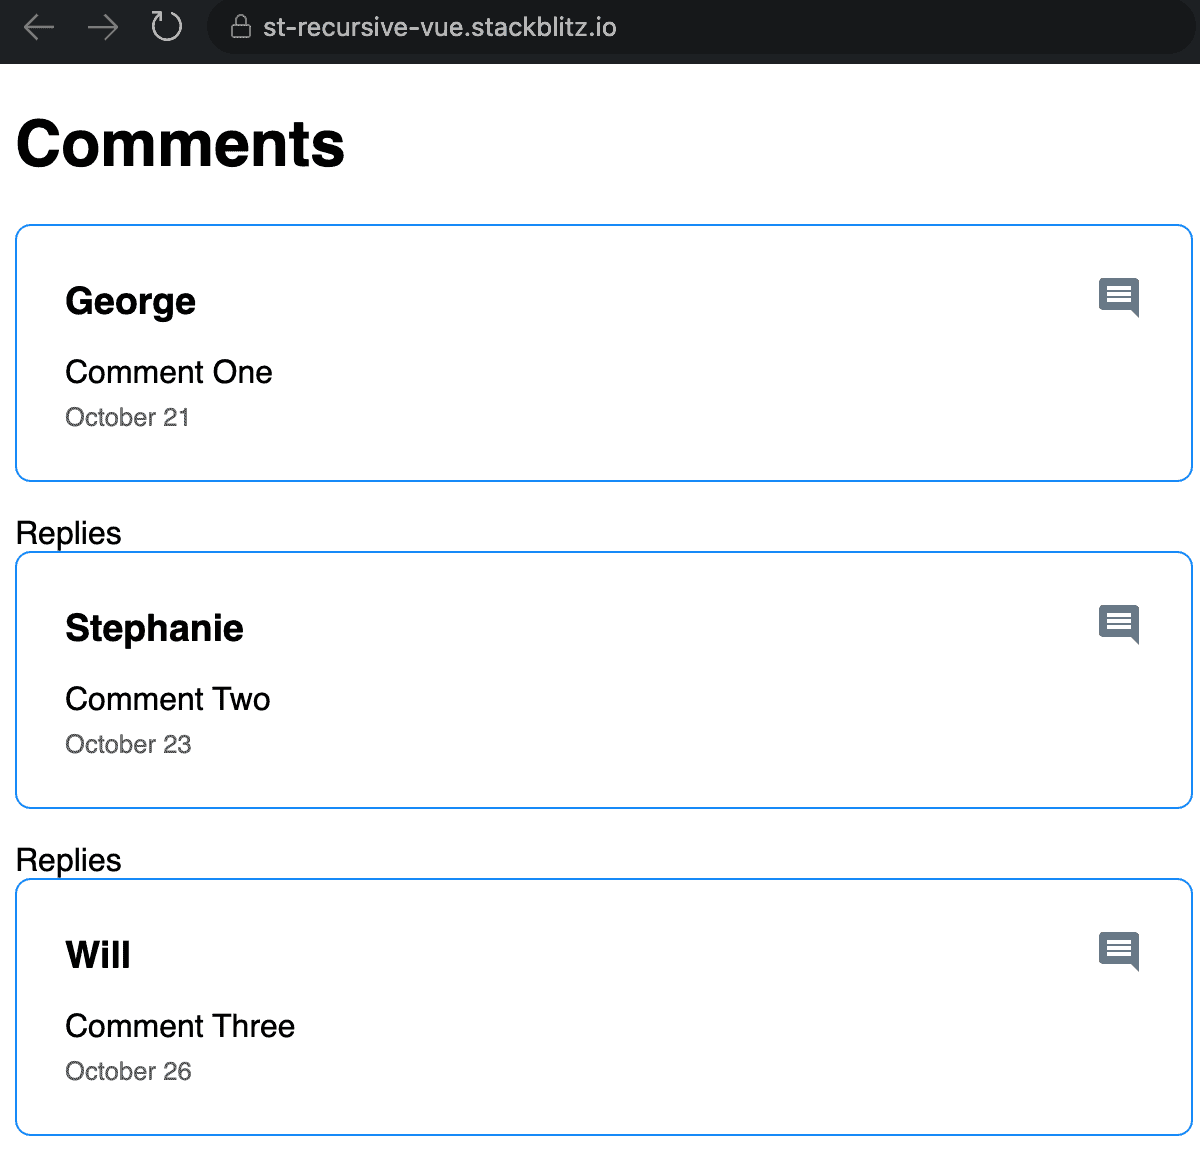 Comment thread output showing replies